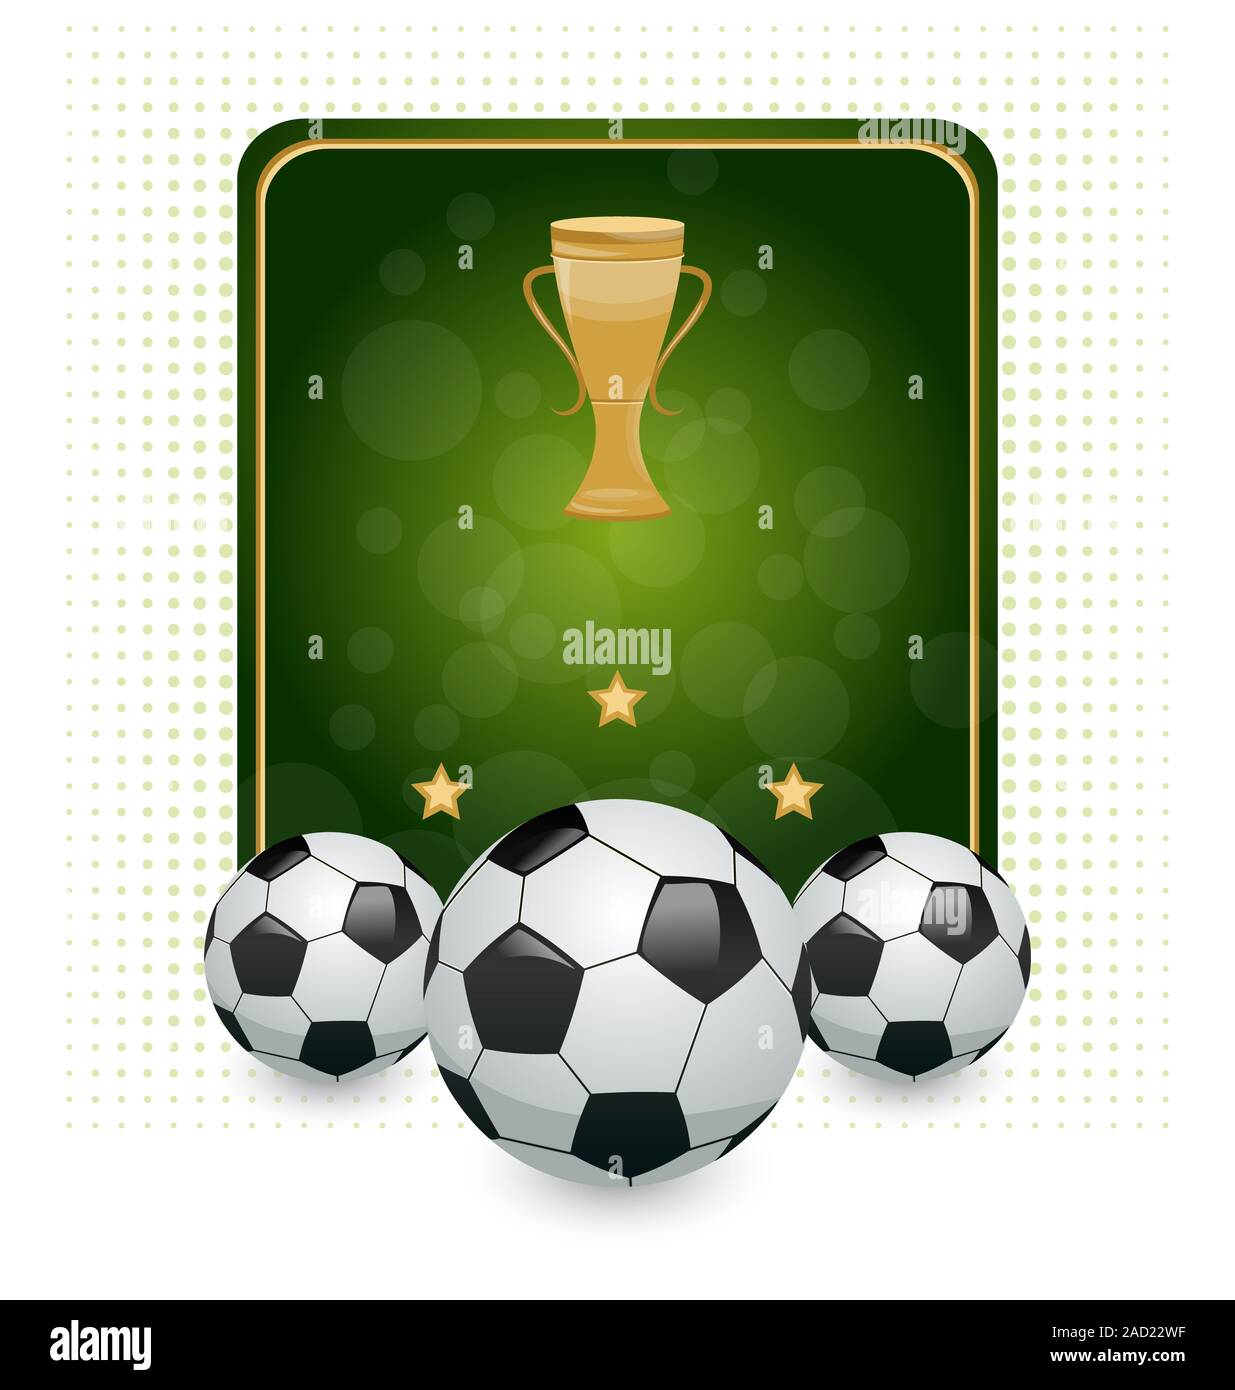 Football layout with champion cup and place for your text Stock Photo